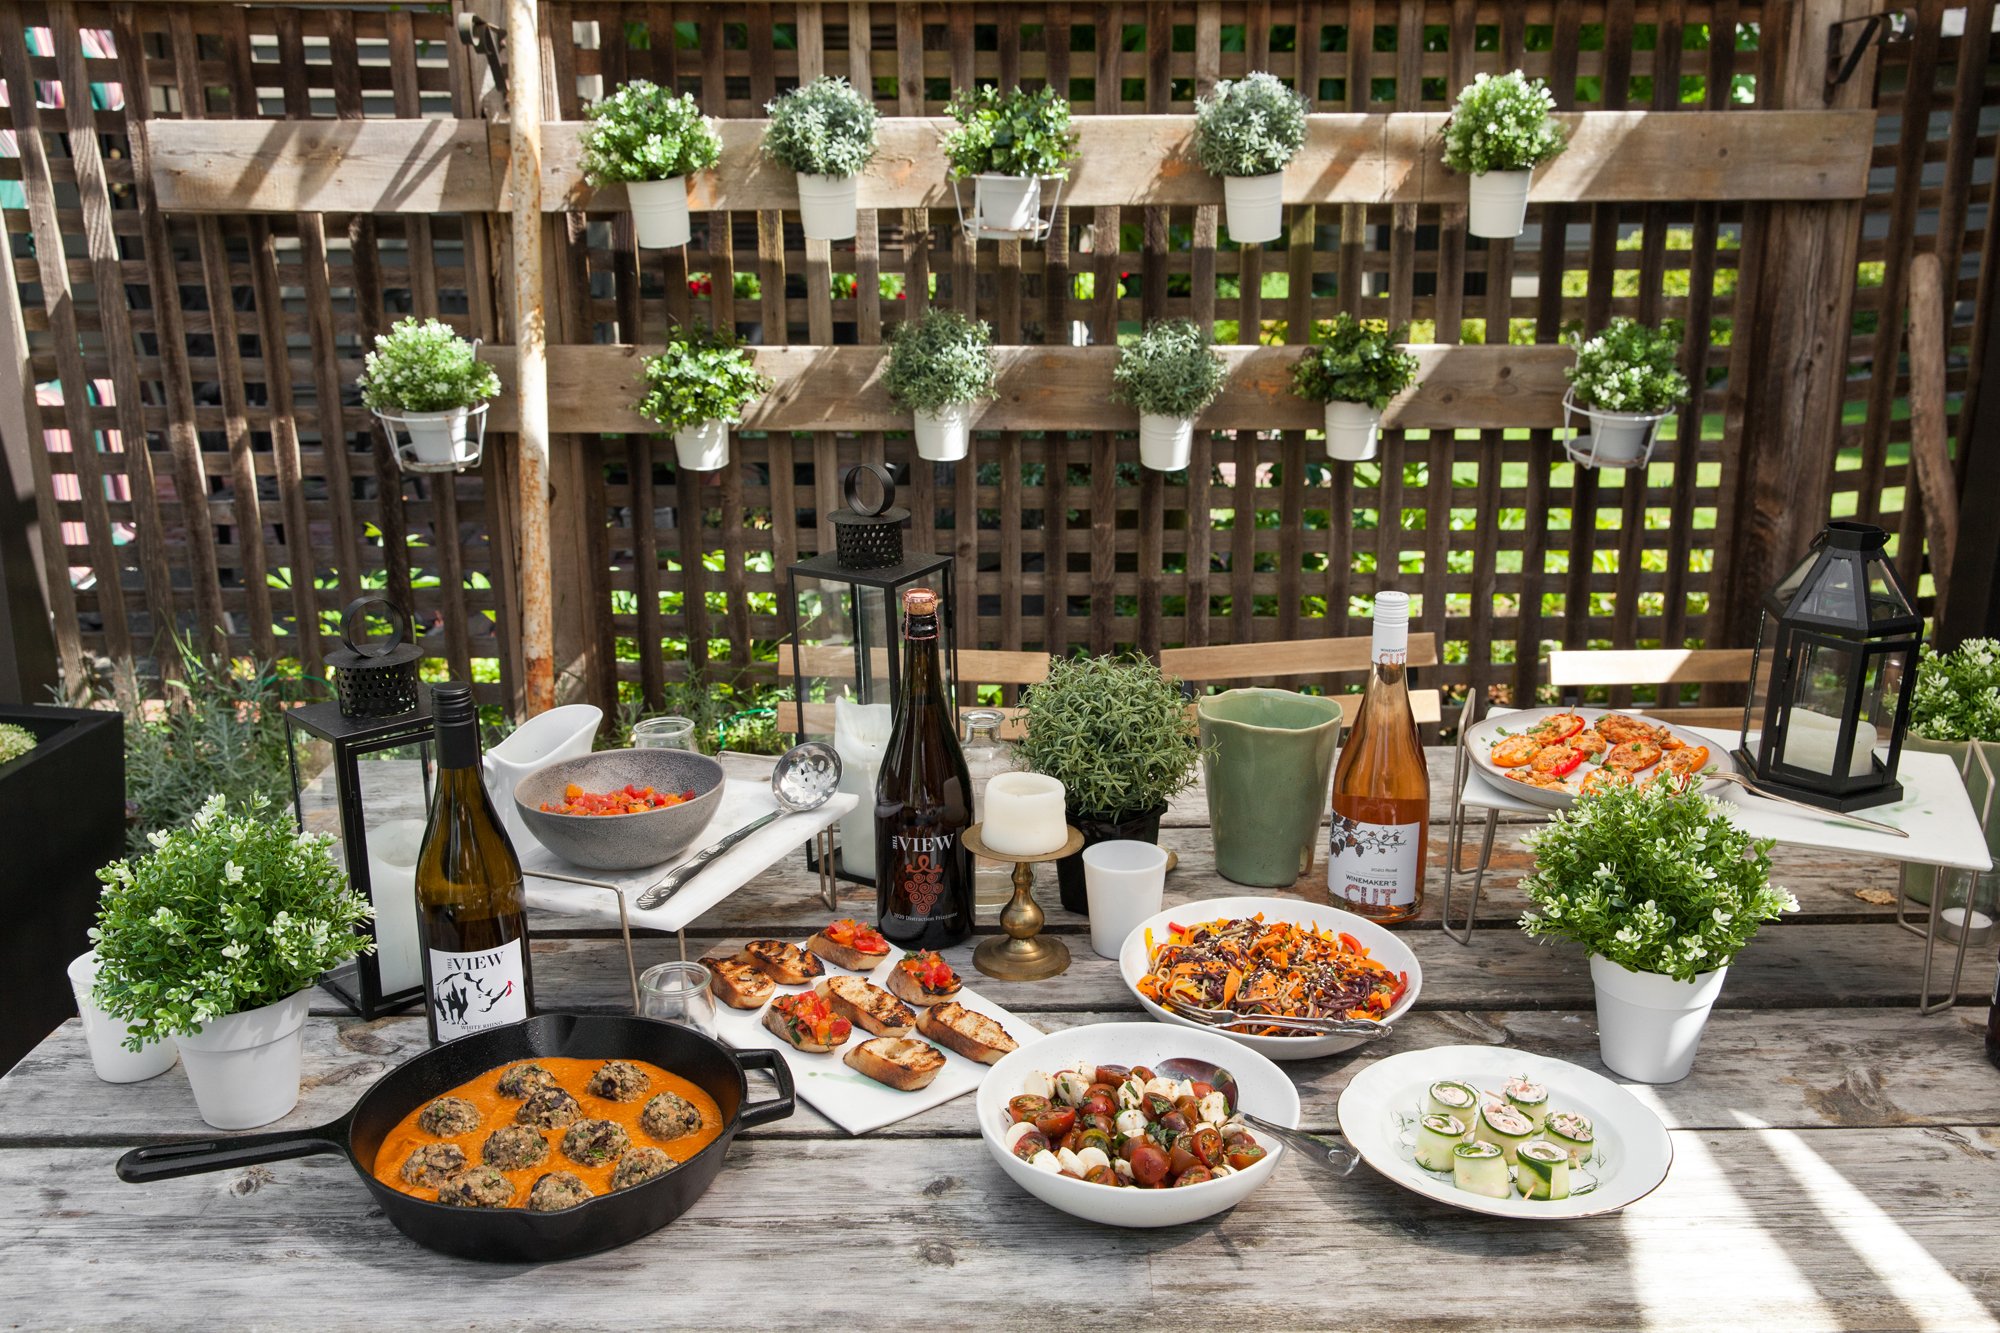  Vegan Eggplant Meatballs on a picnic table surrounded by other dishes 